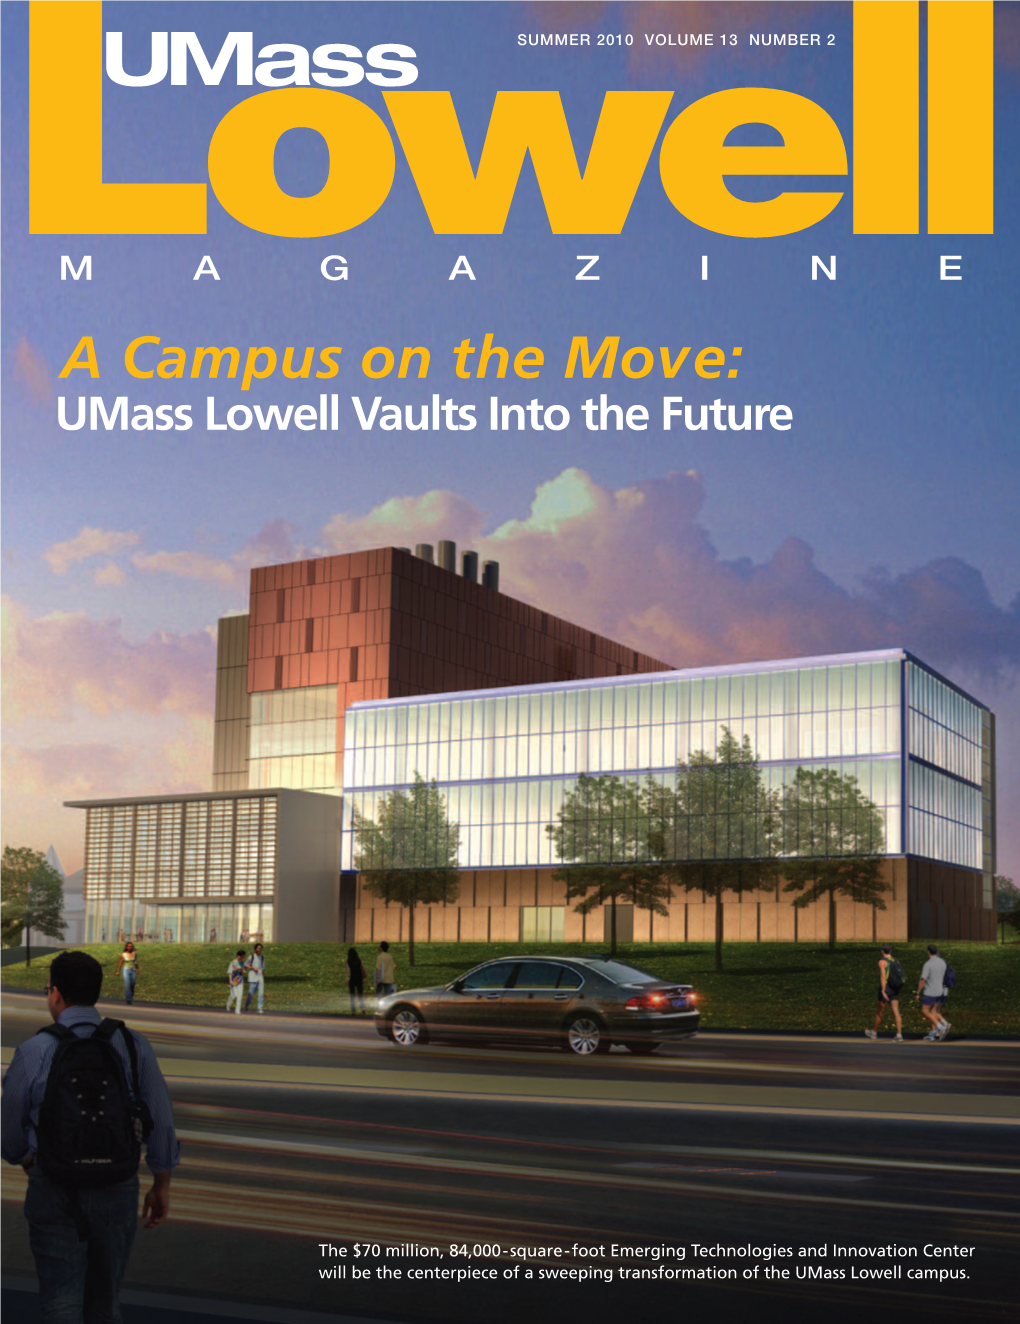 A Campus on the Move